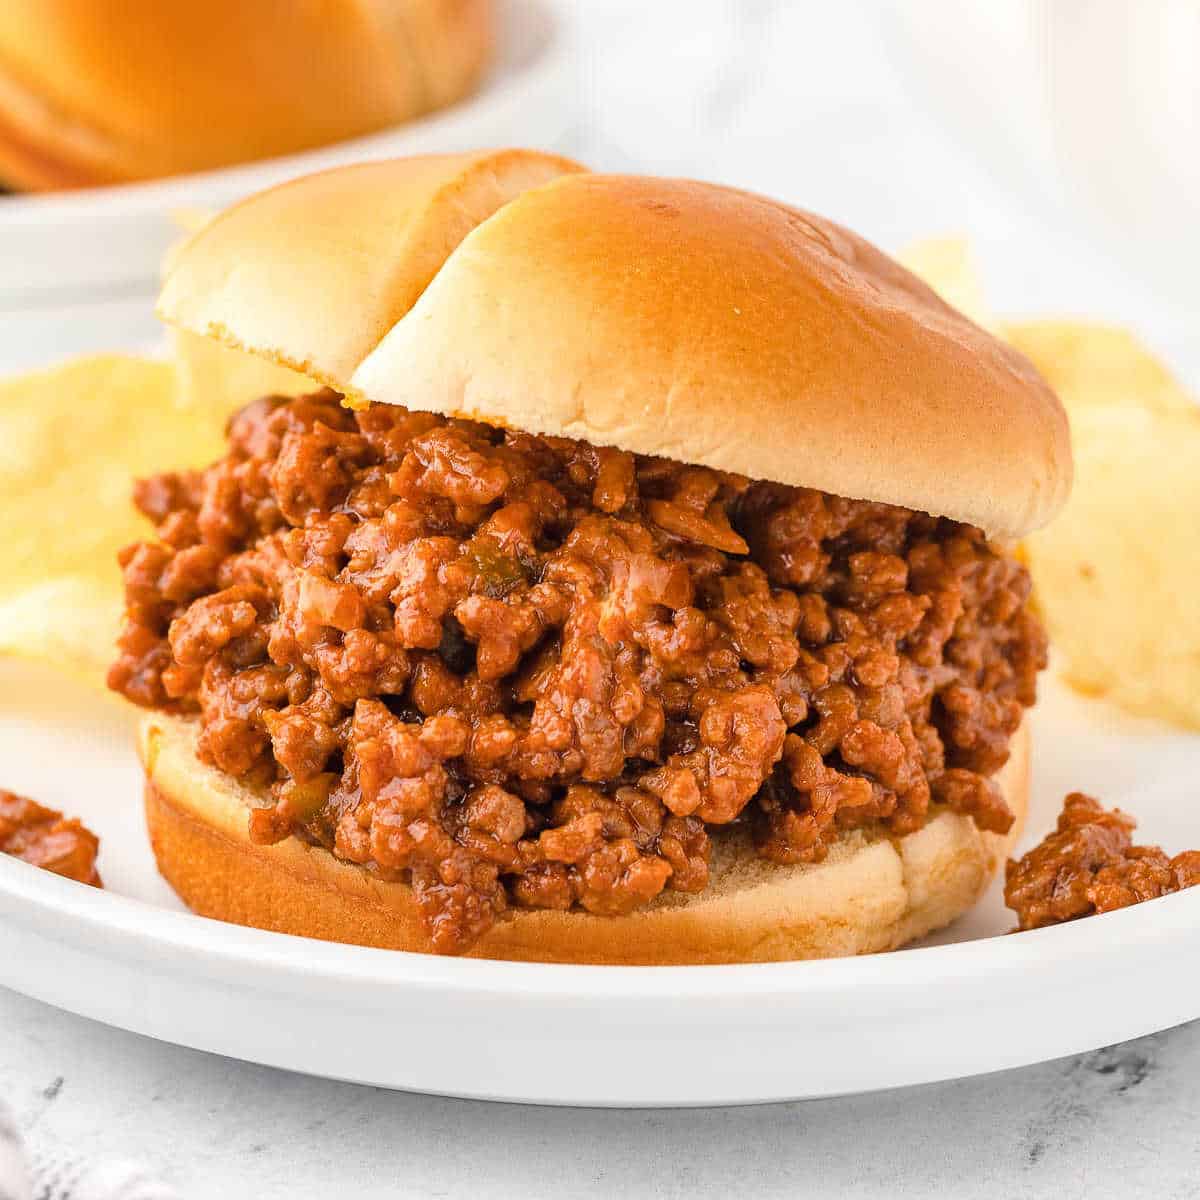 sloppy joes sandwich on a white plate with chips